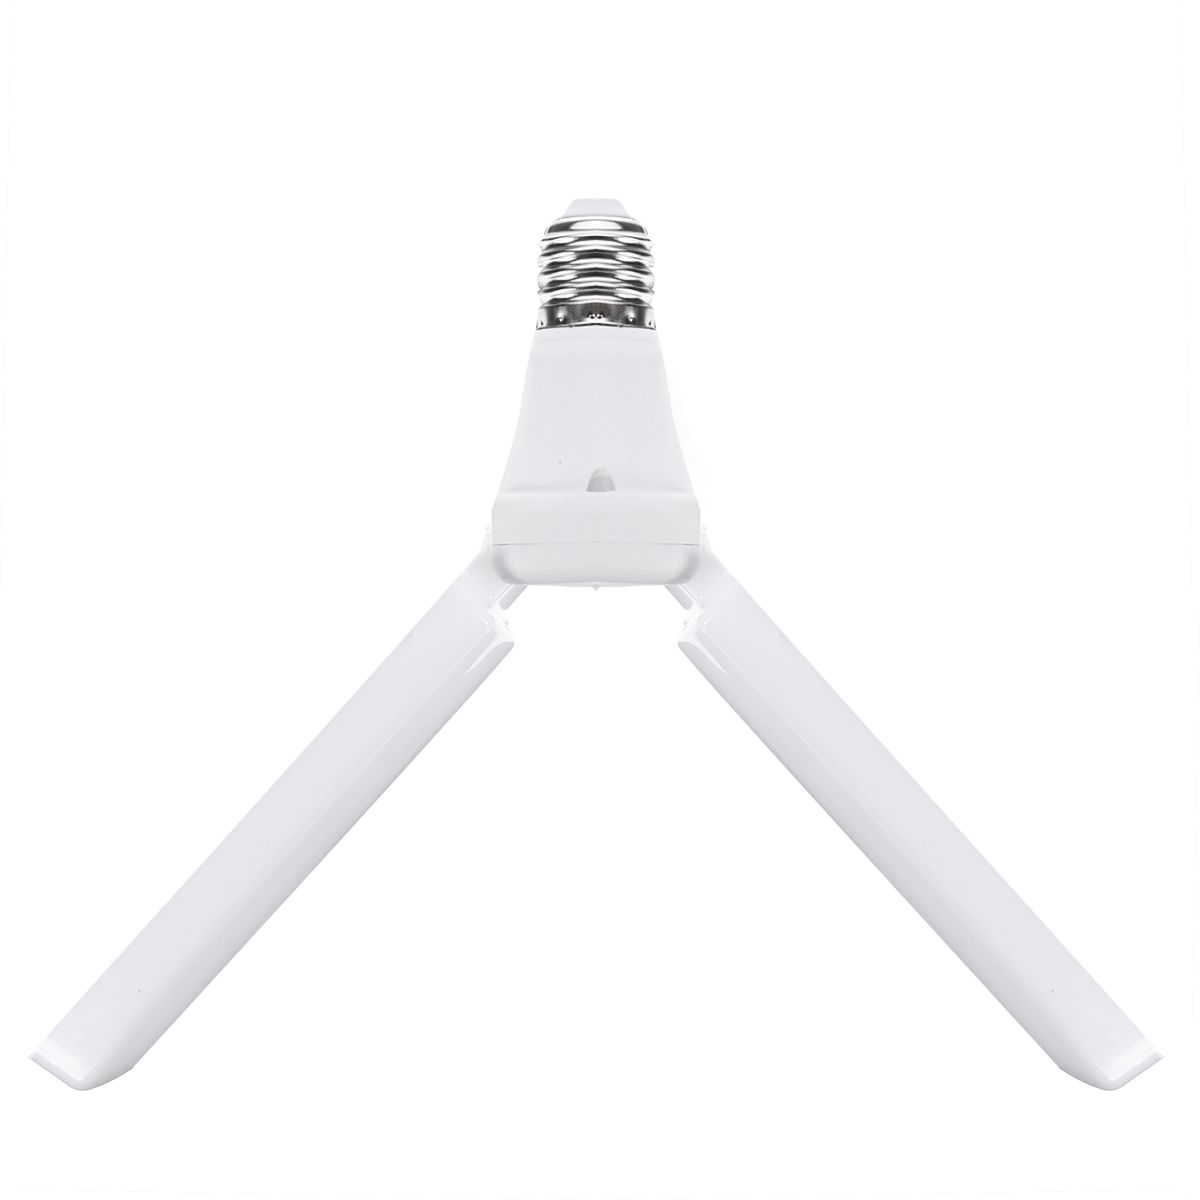 AC85-256V-30W-E27-LED-Bulb-2-blades-Foldable-Fan-Blade-Adjustable-Ceiling-Lamp-for-Indoor-Home-Use-1705893